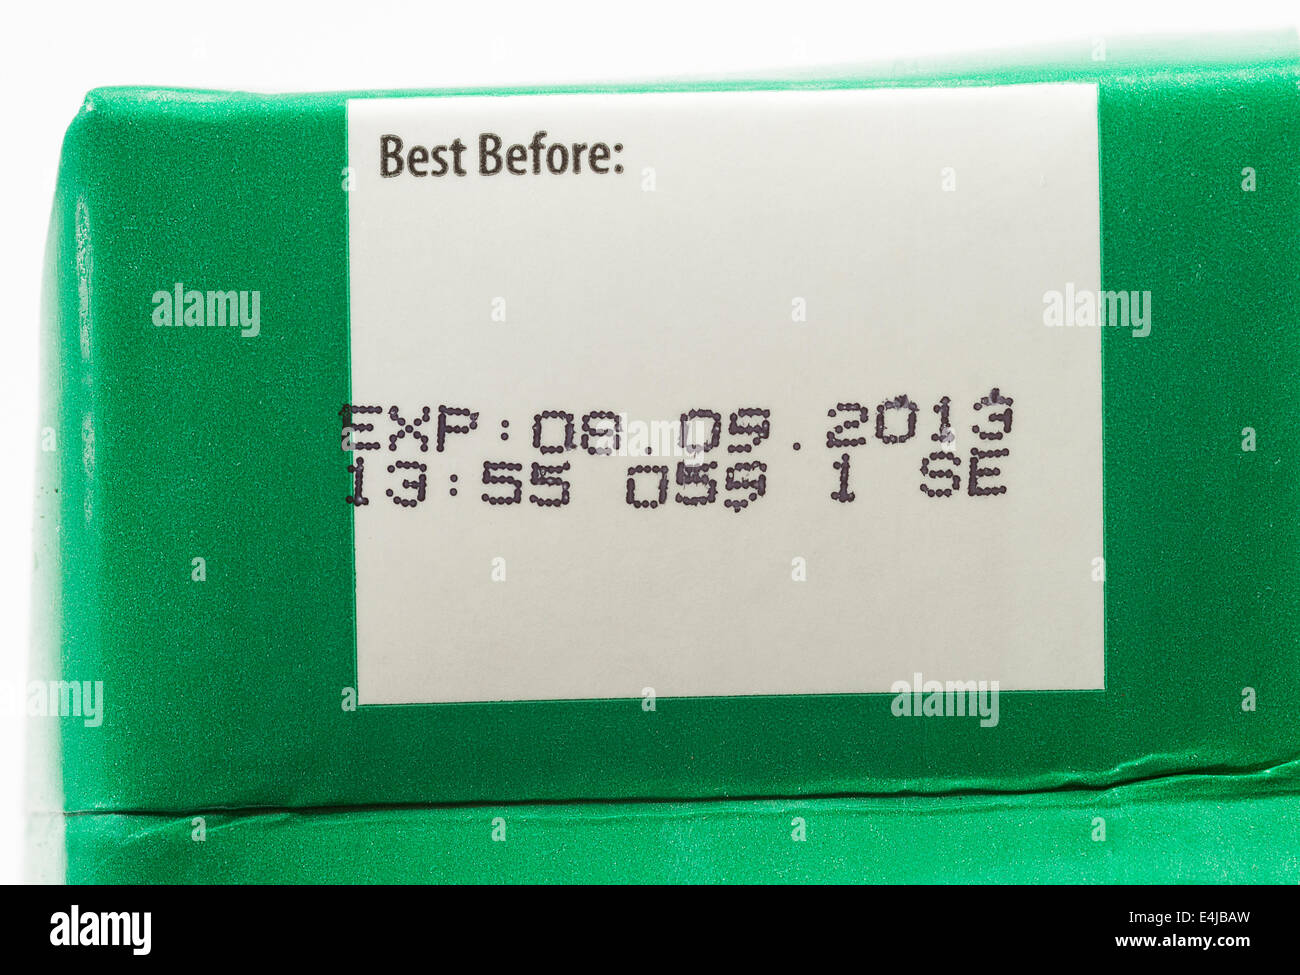 Best before date on a carton of milk Stock Photo